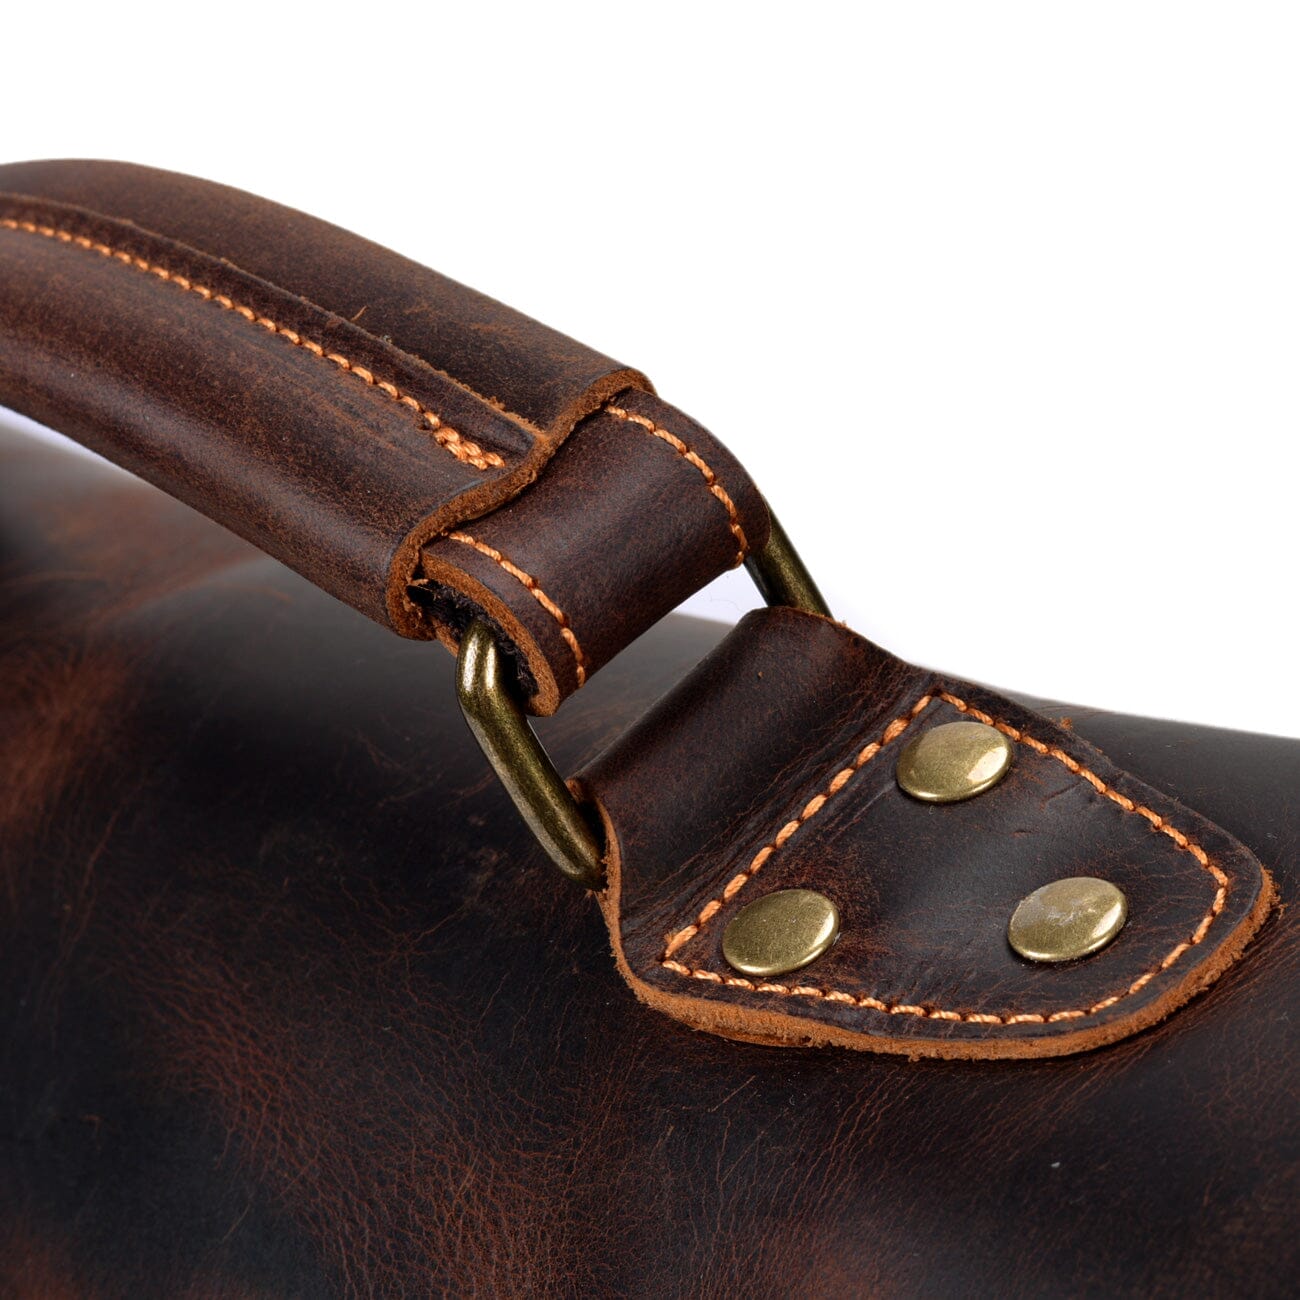 leather flap with rivets reinforced leather handle of the messenger bag from eiken, tulsa model